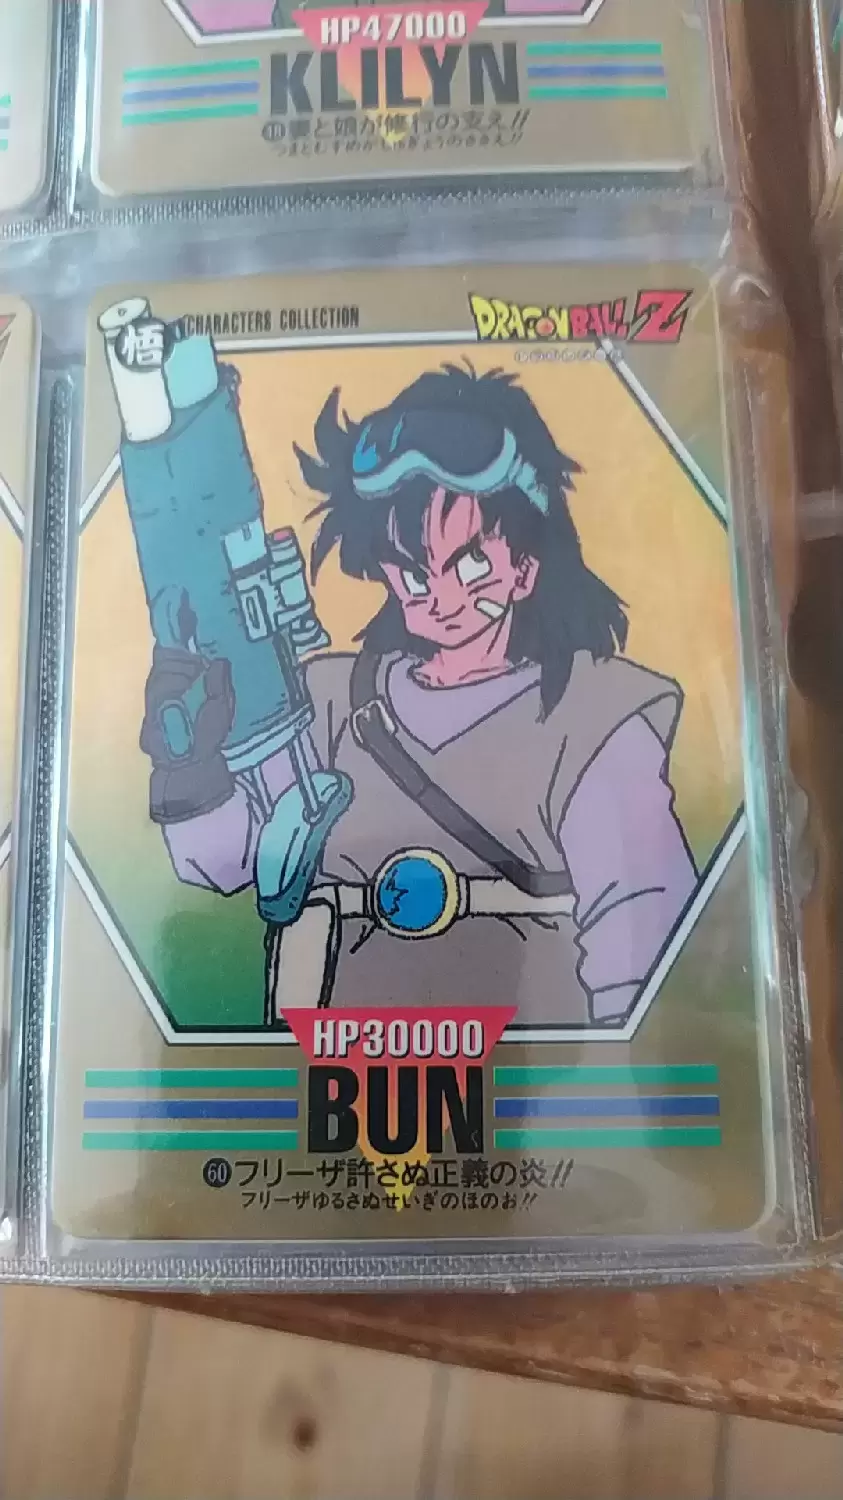 Dragon ball Characters Collection Part 2 - Card n°60